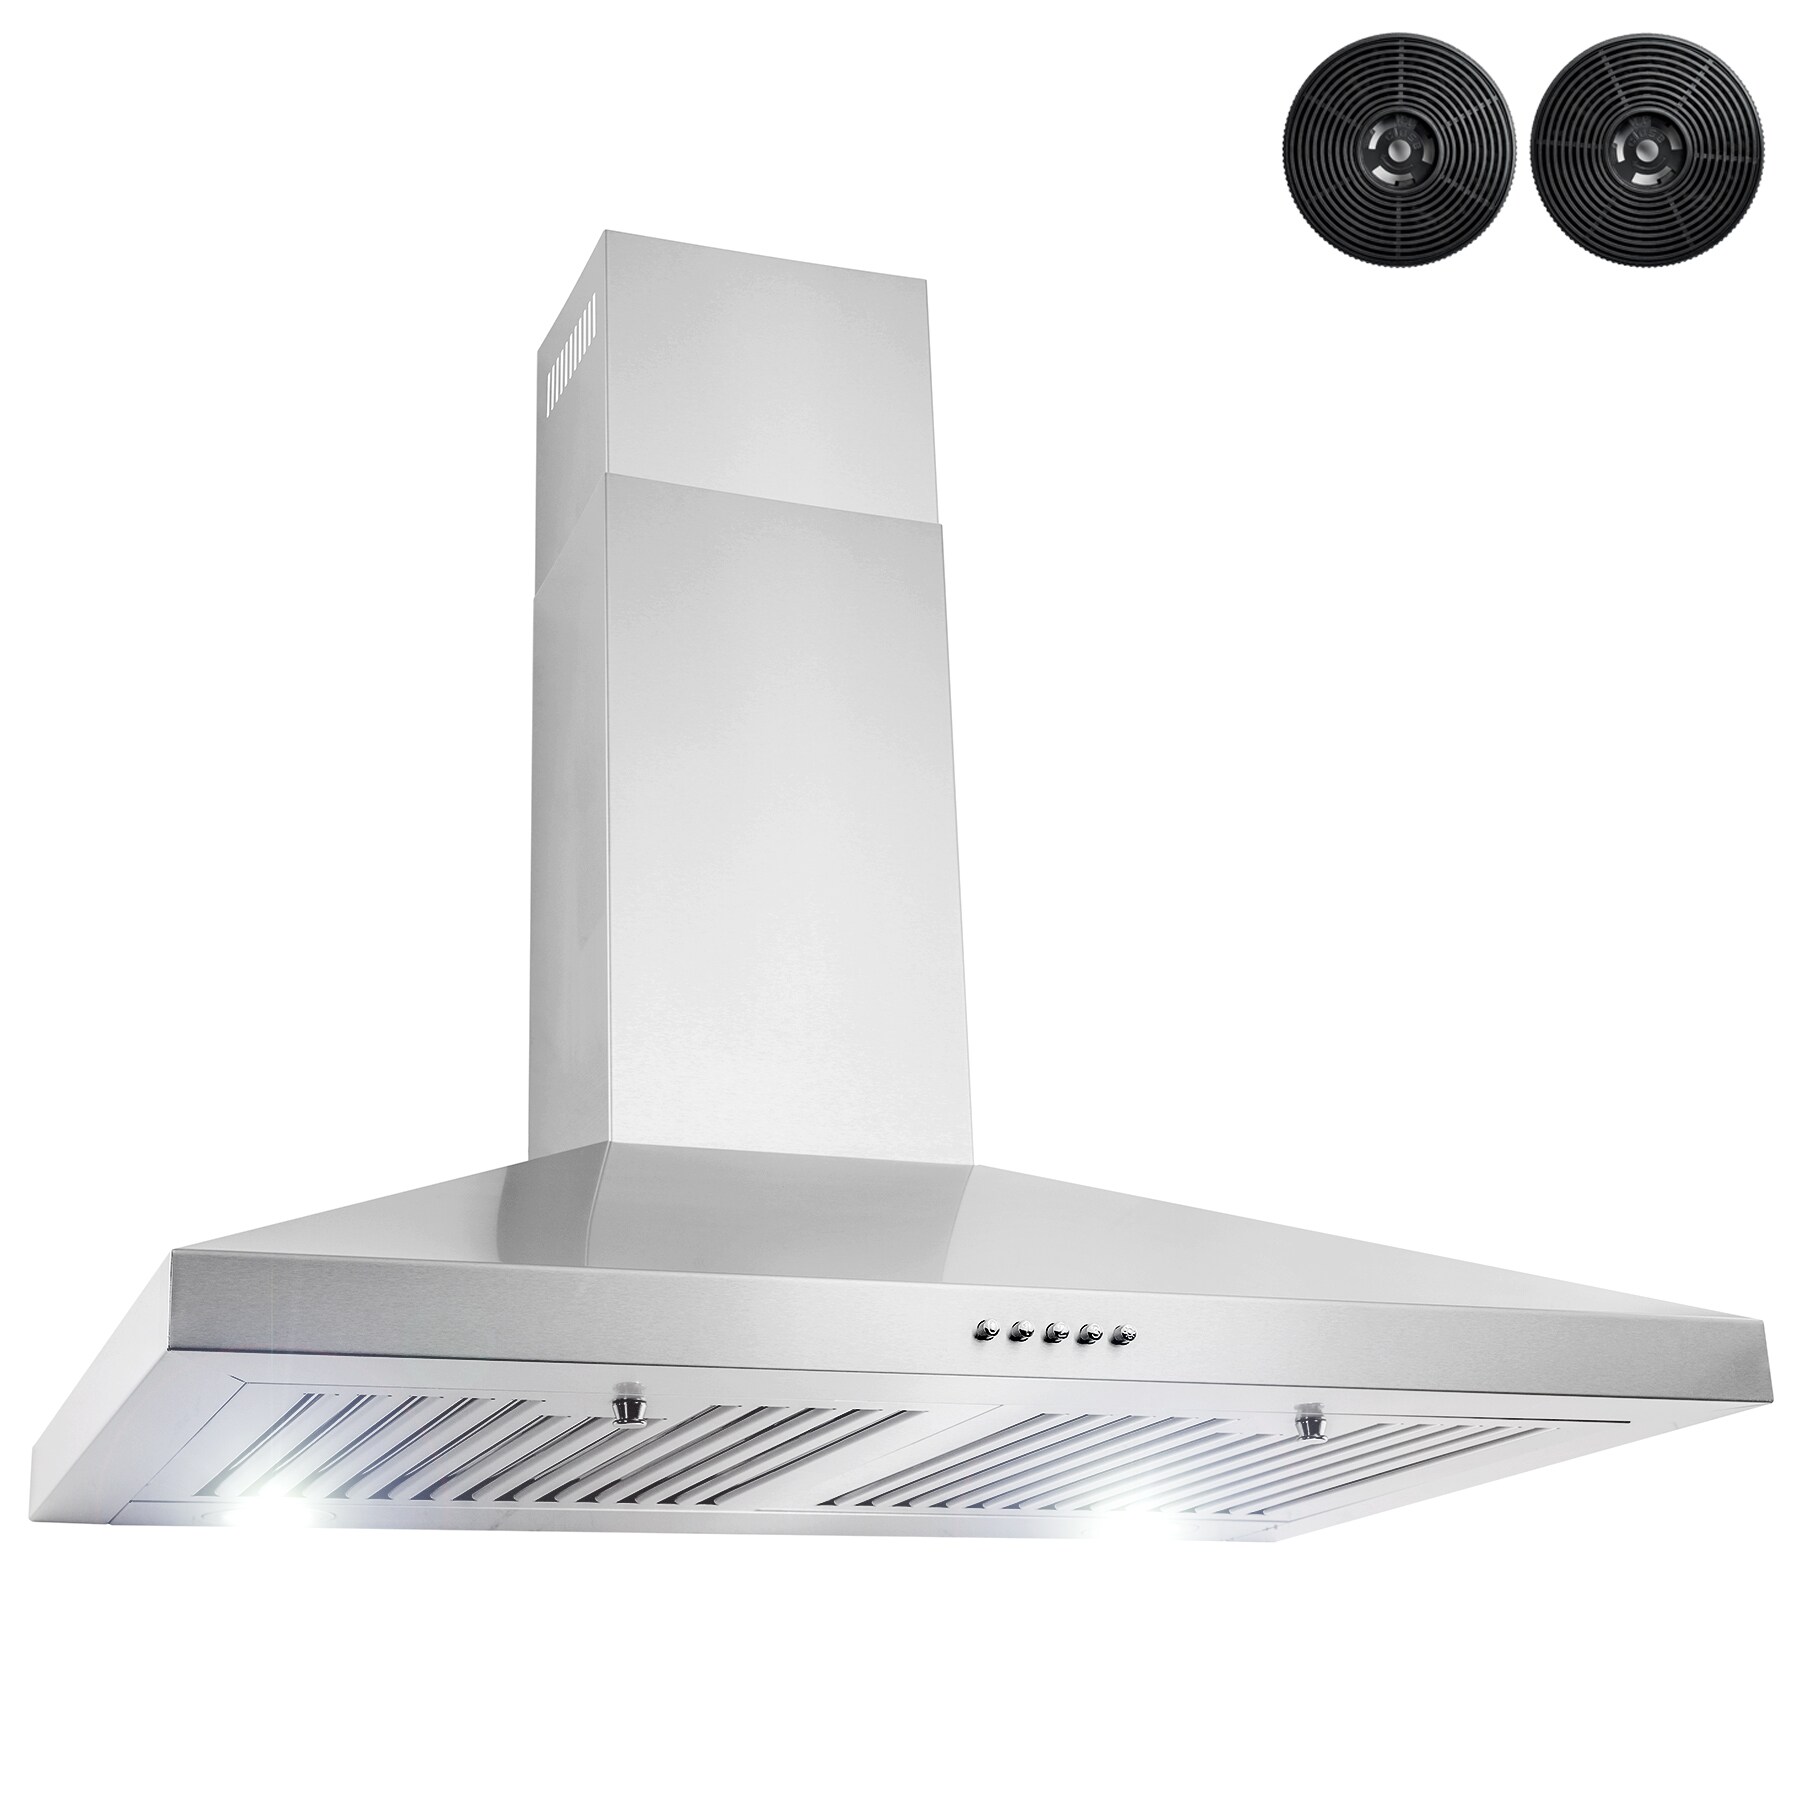 AKDY 30-in Convertible Stainless Steel Wall-Mounted Range Hood with Charcoal Filter